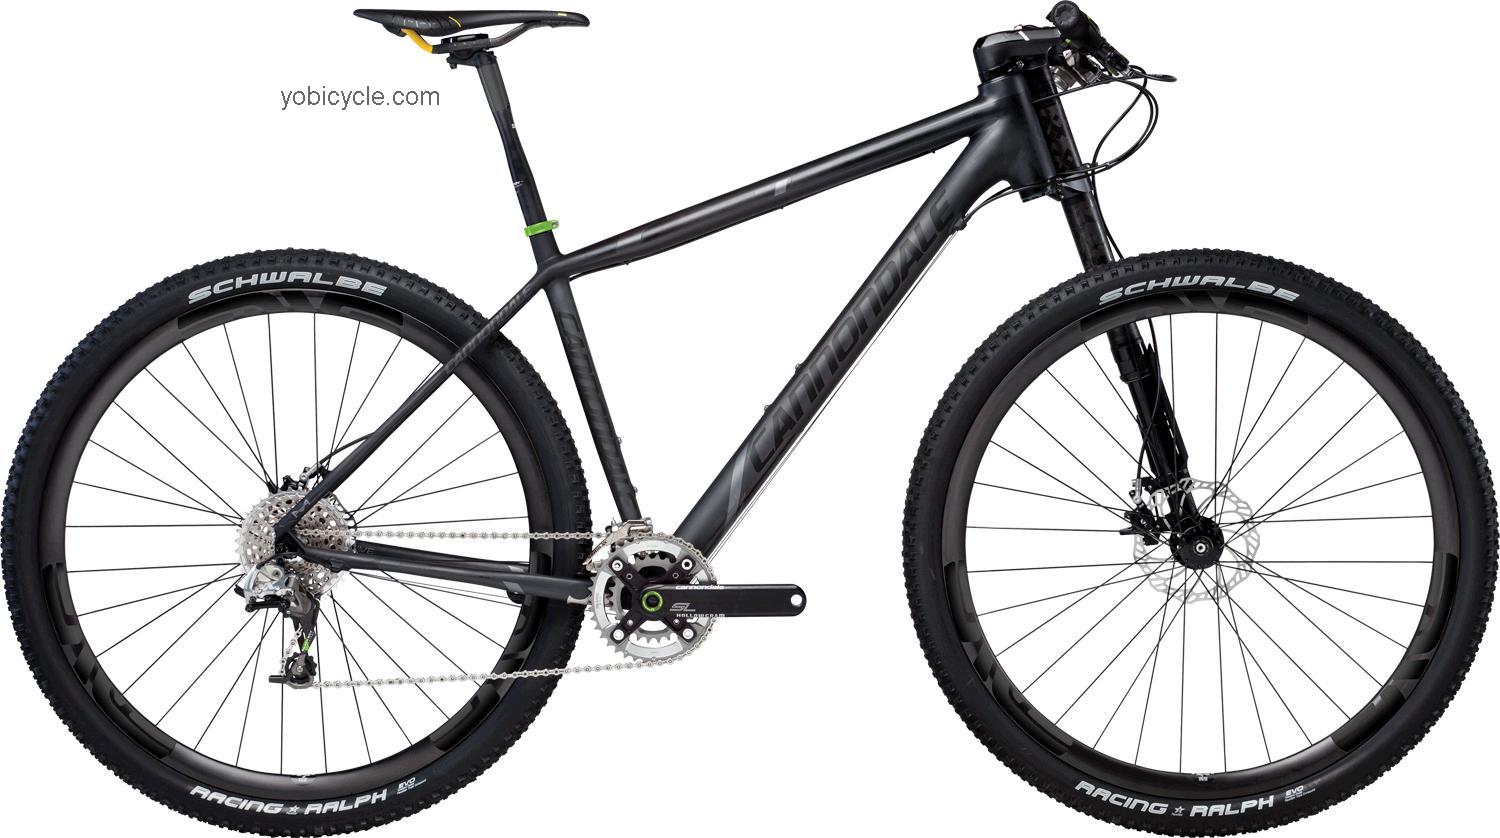 Cannondale F29 Carbon Ultimate 2013 comparison online with competitors